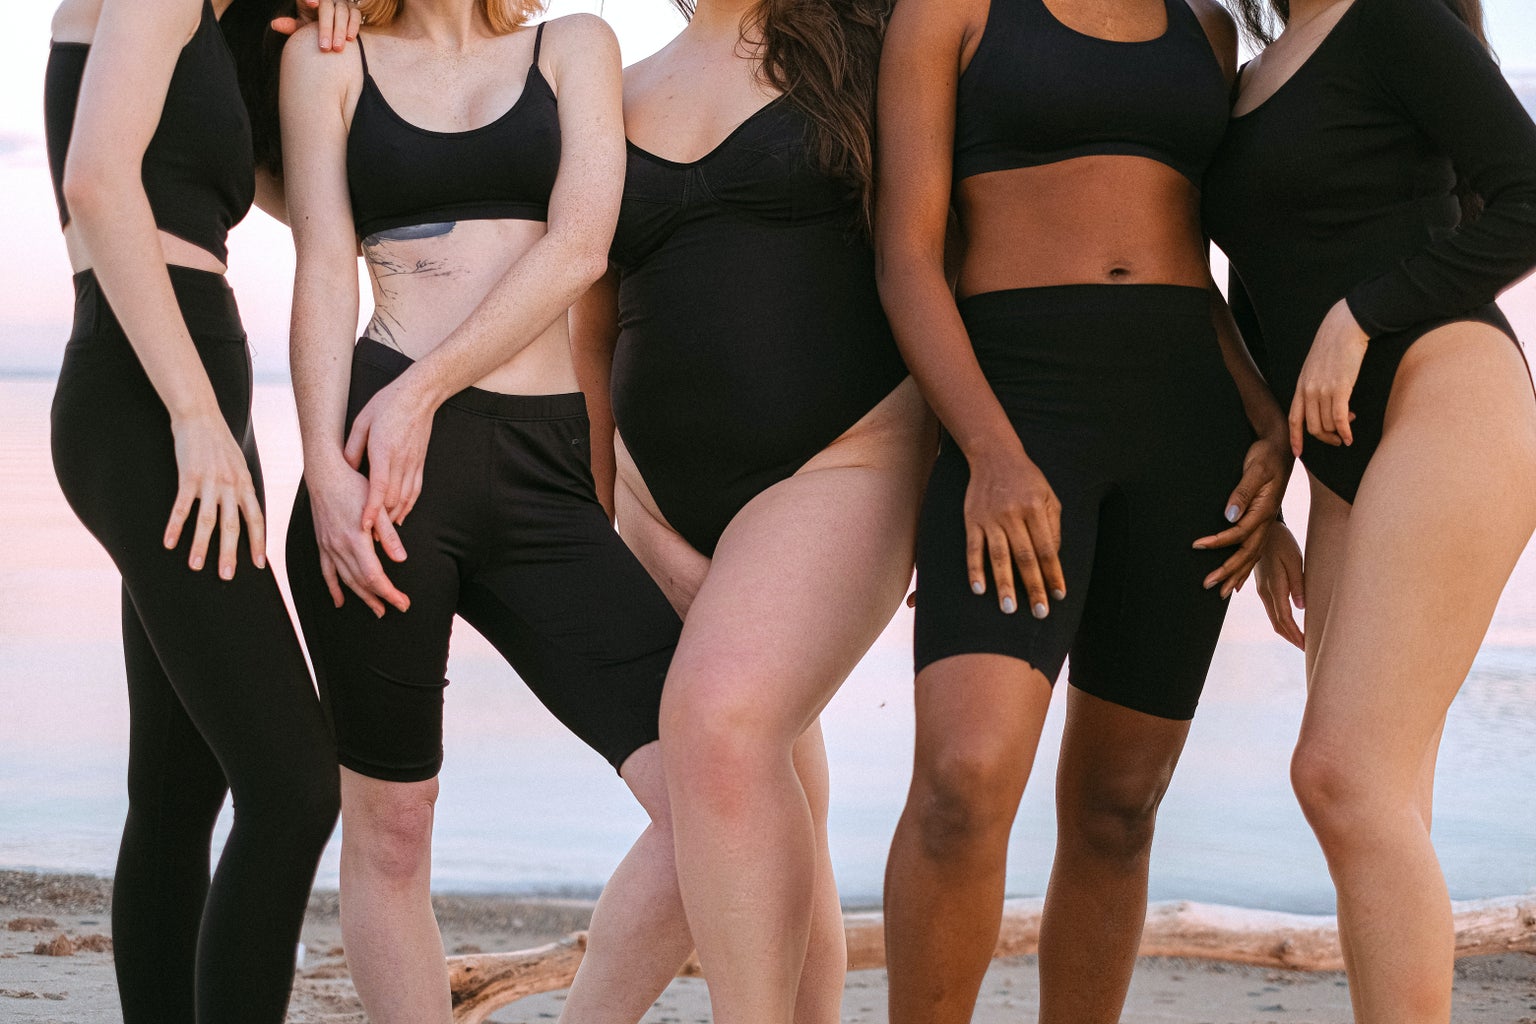 women with different body types